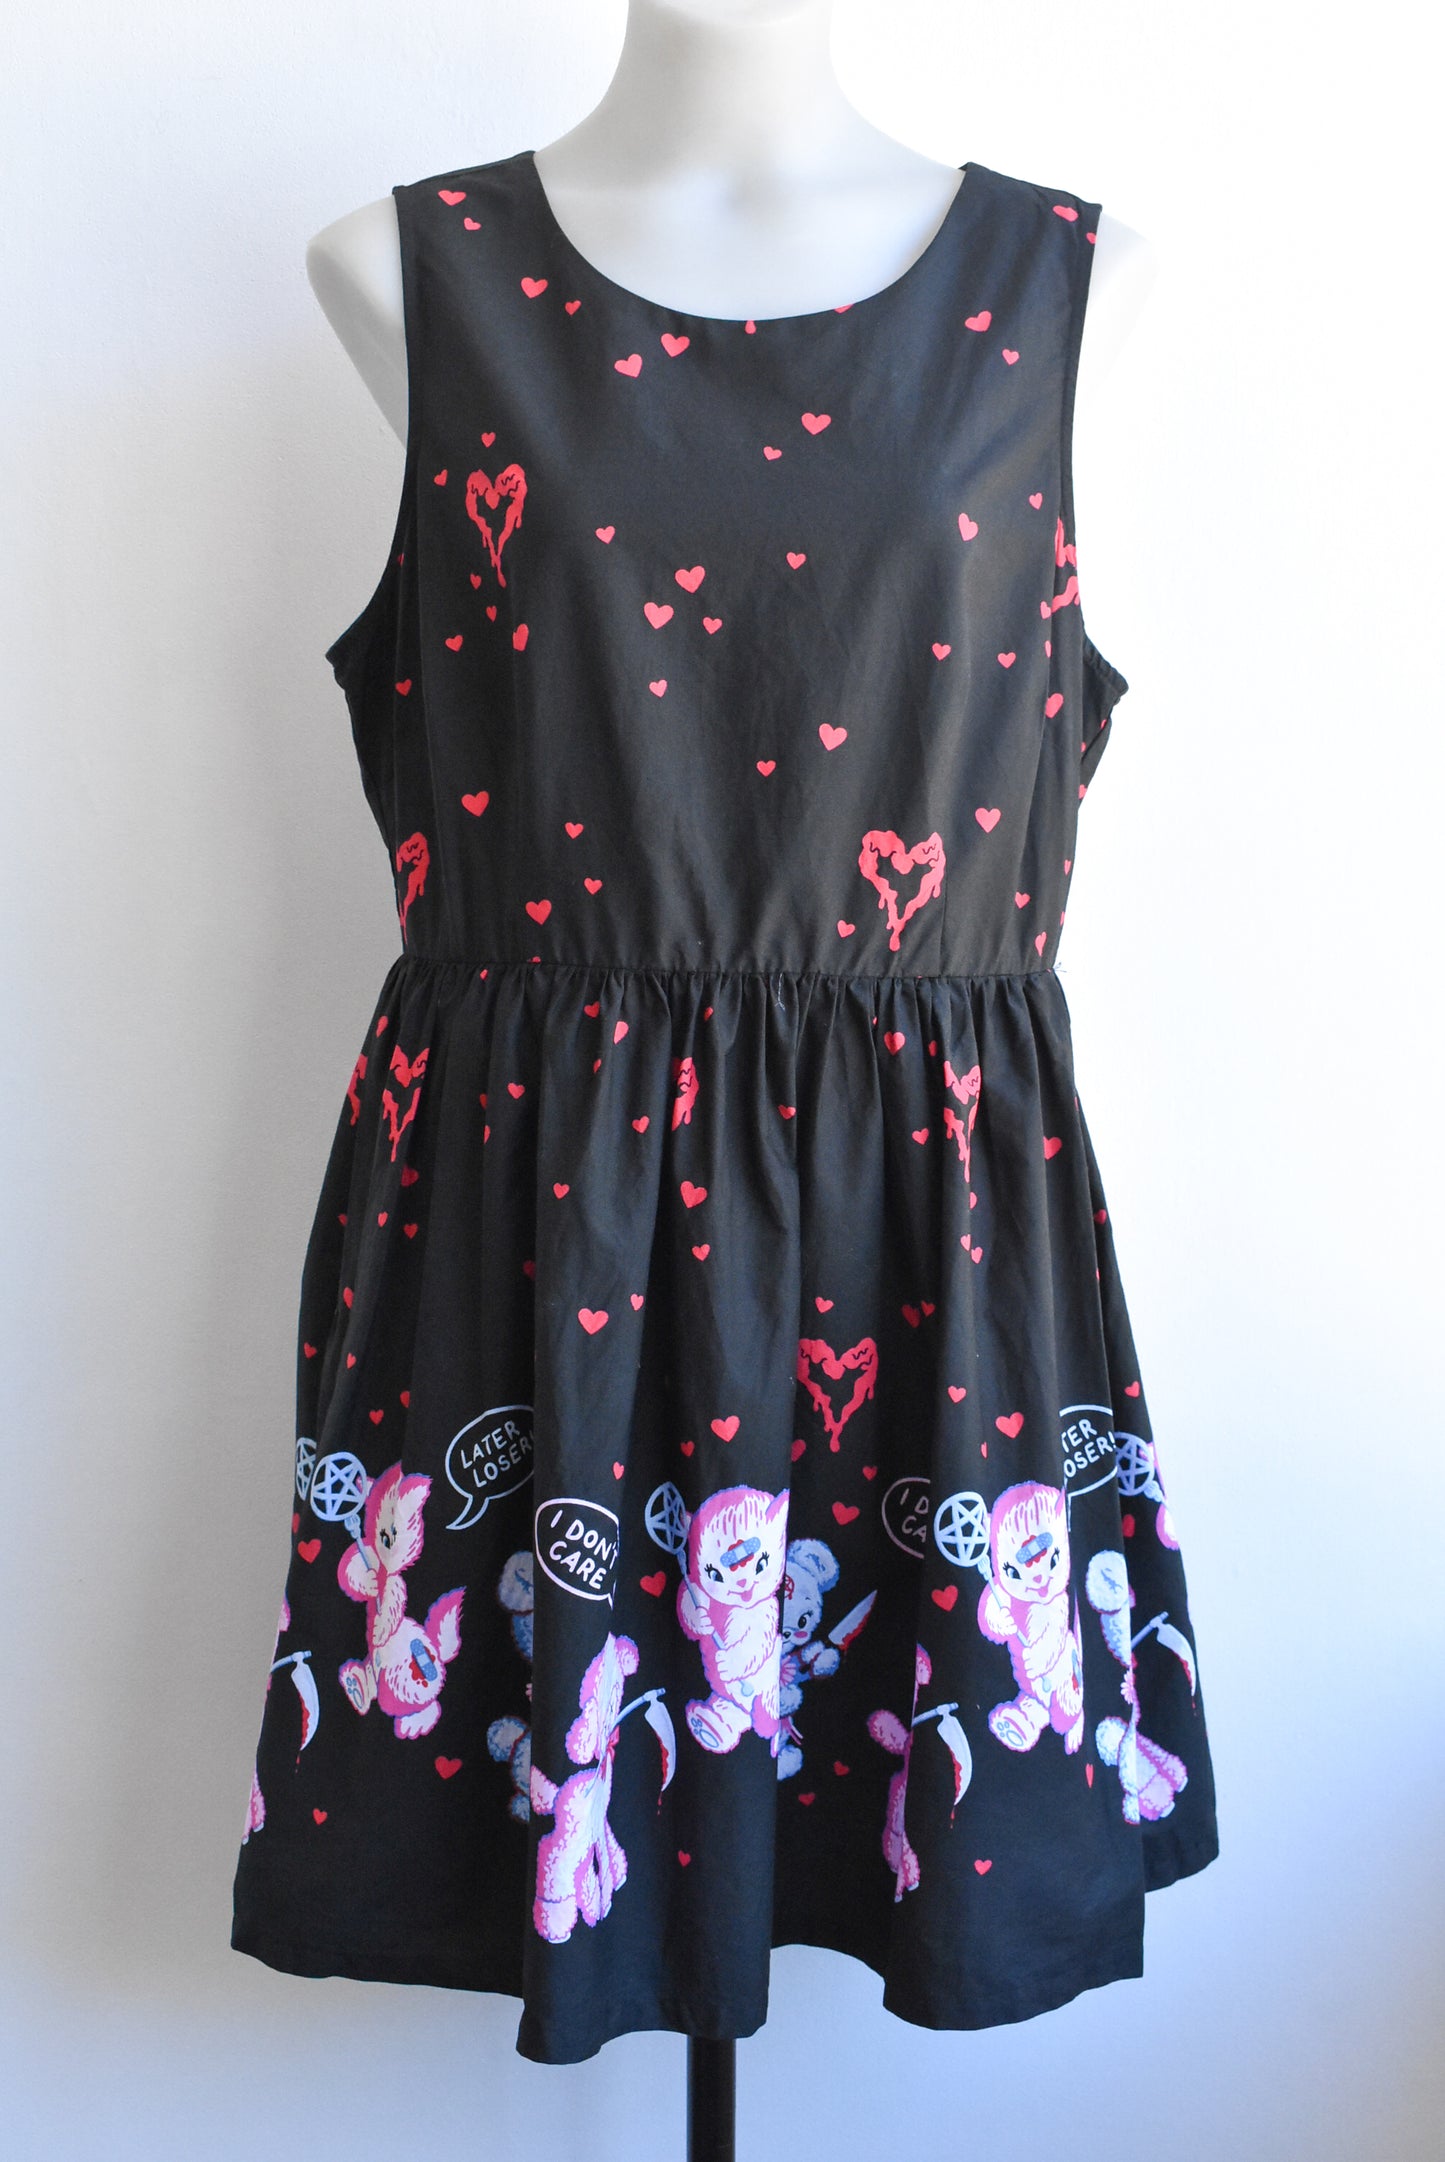 Black Friday cynical lamb/kitten dress with pockets, size 14